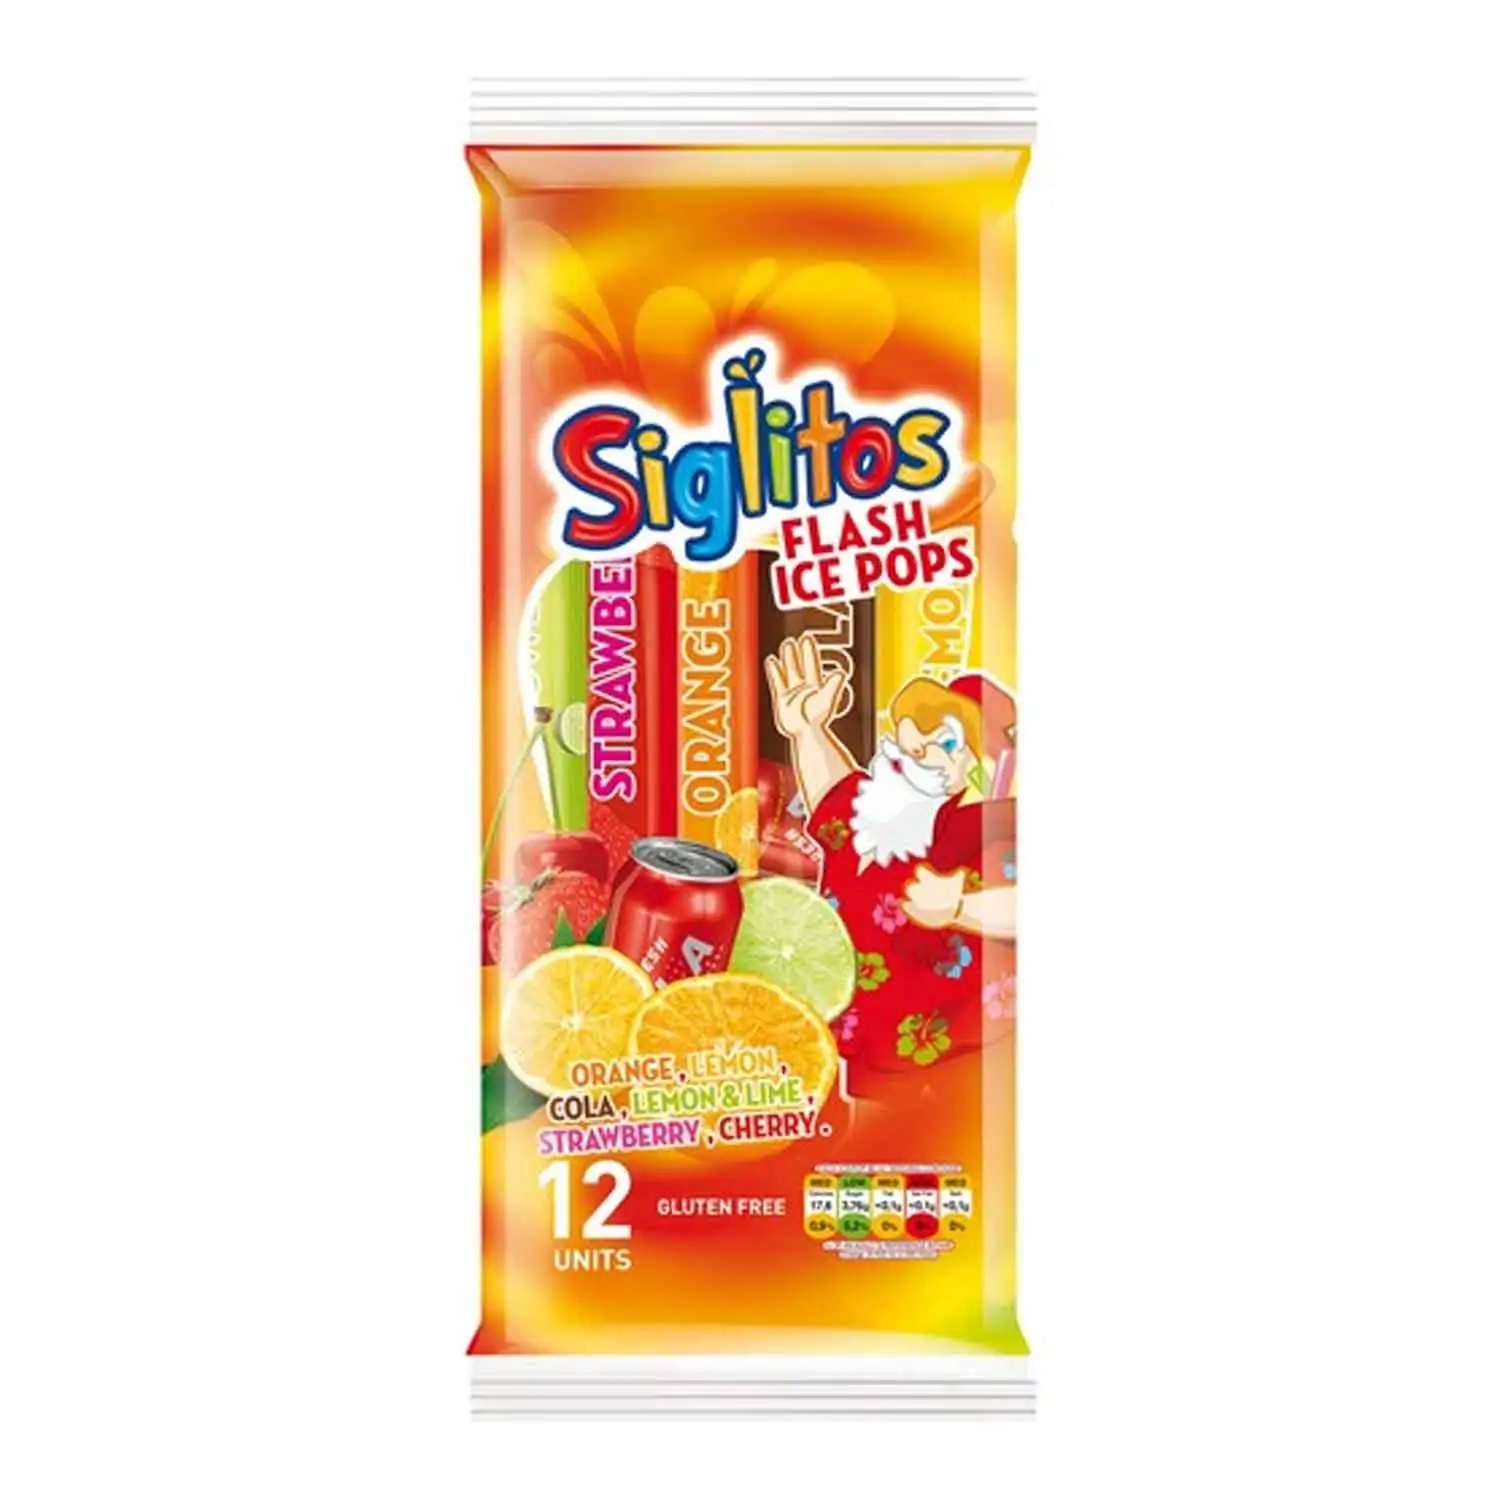 Siglitos flash ice pops 12x80ml - Buy at Real Tobacco